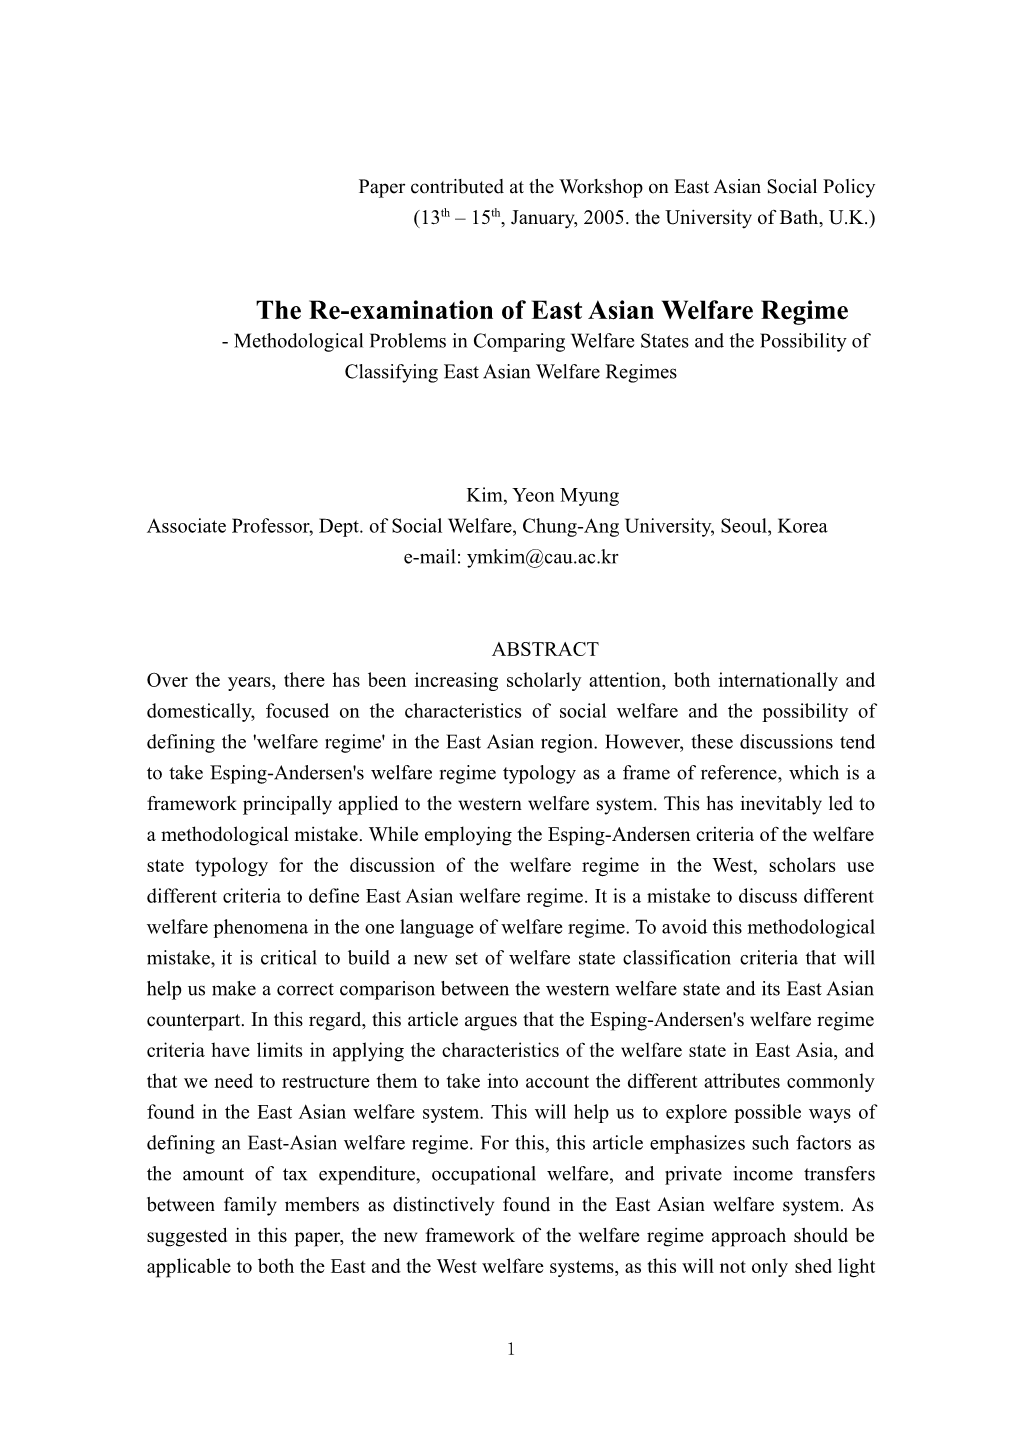 The Re-Examination of East Asian Welfare Regime